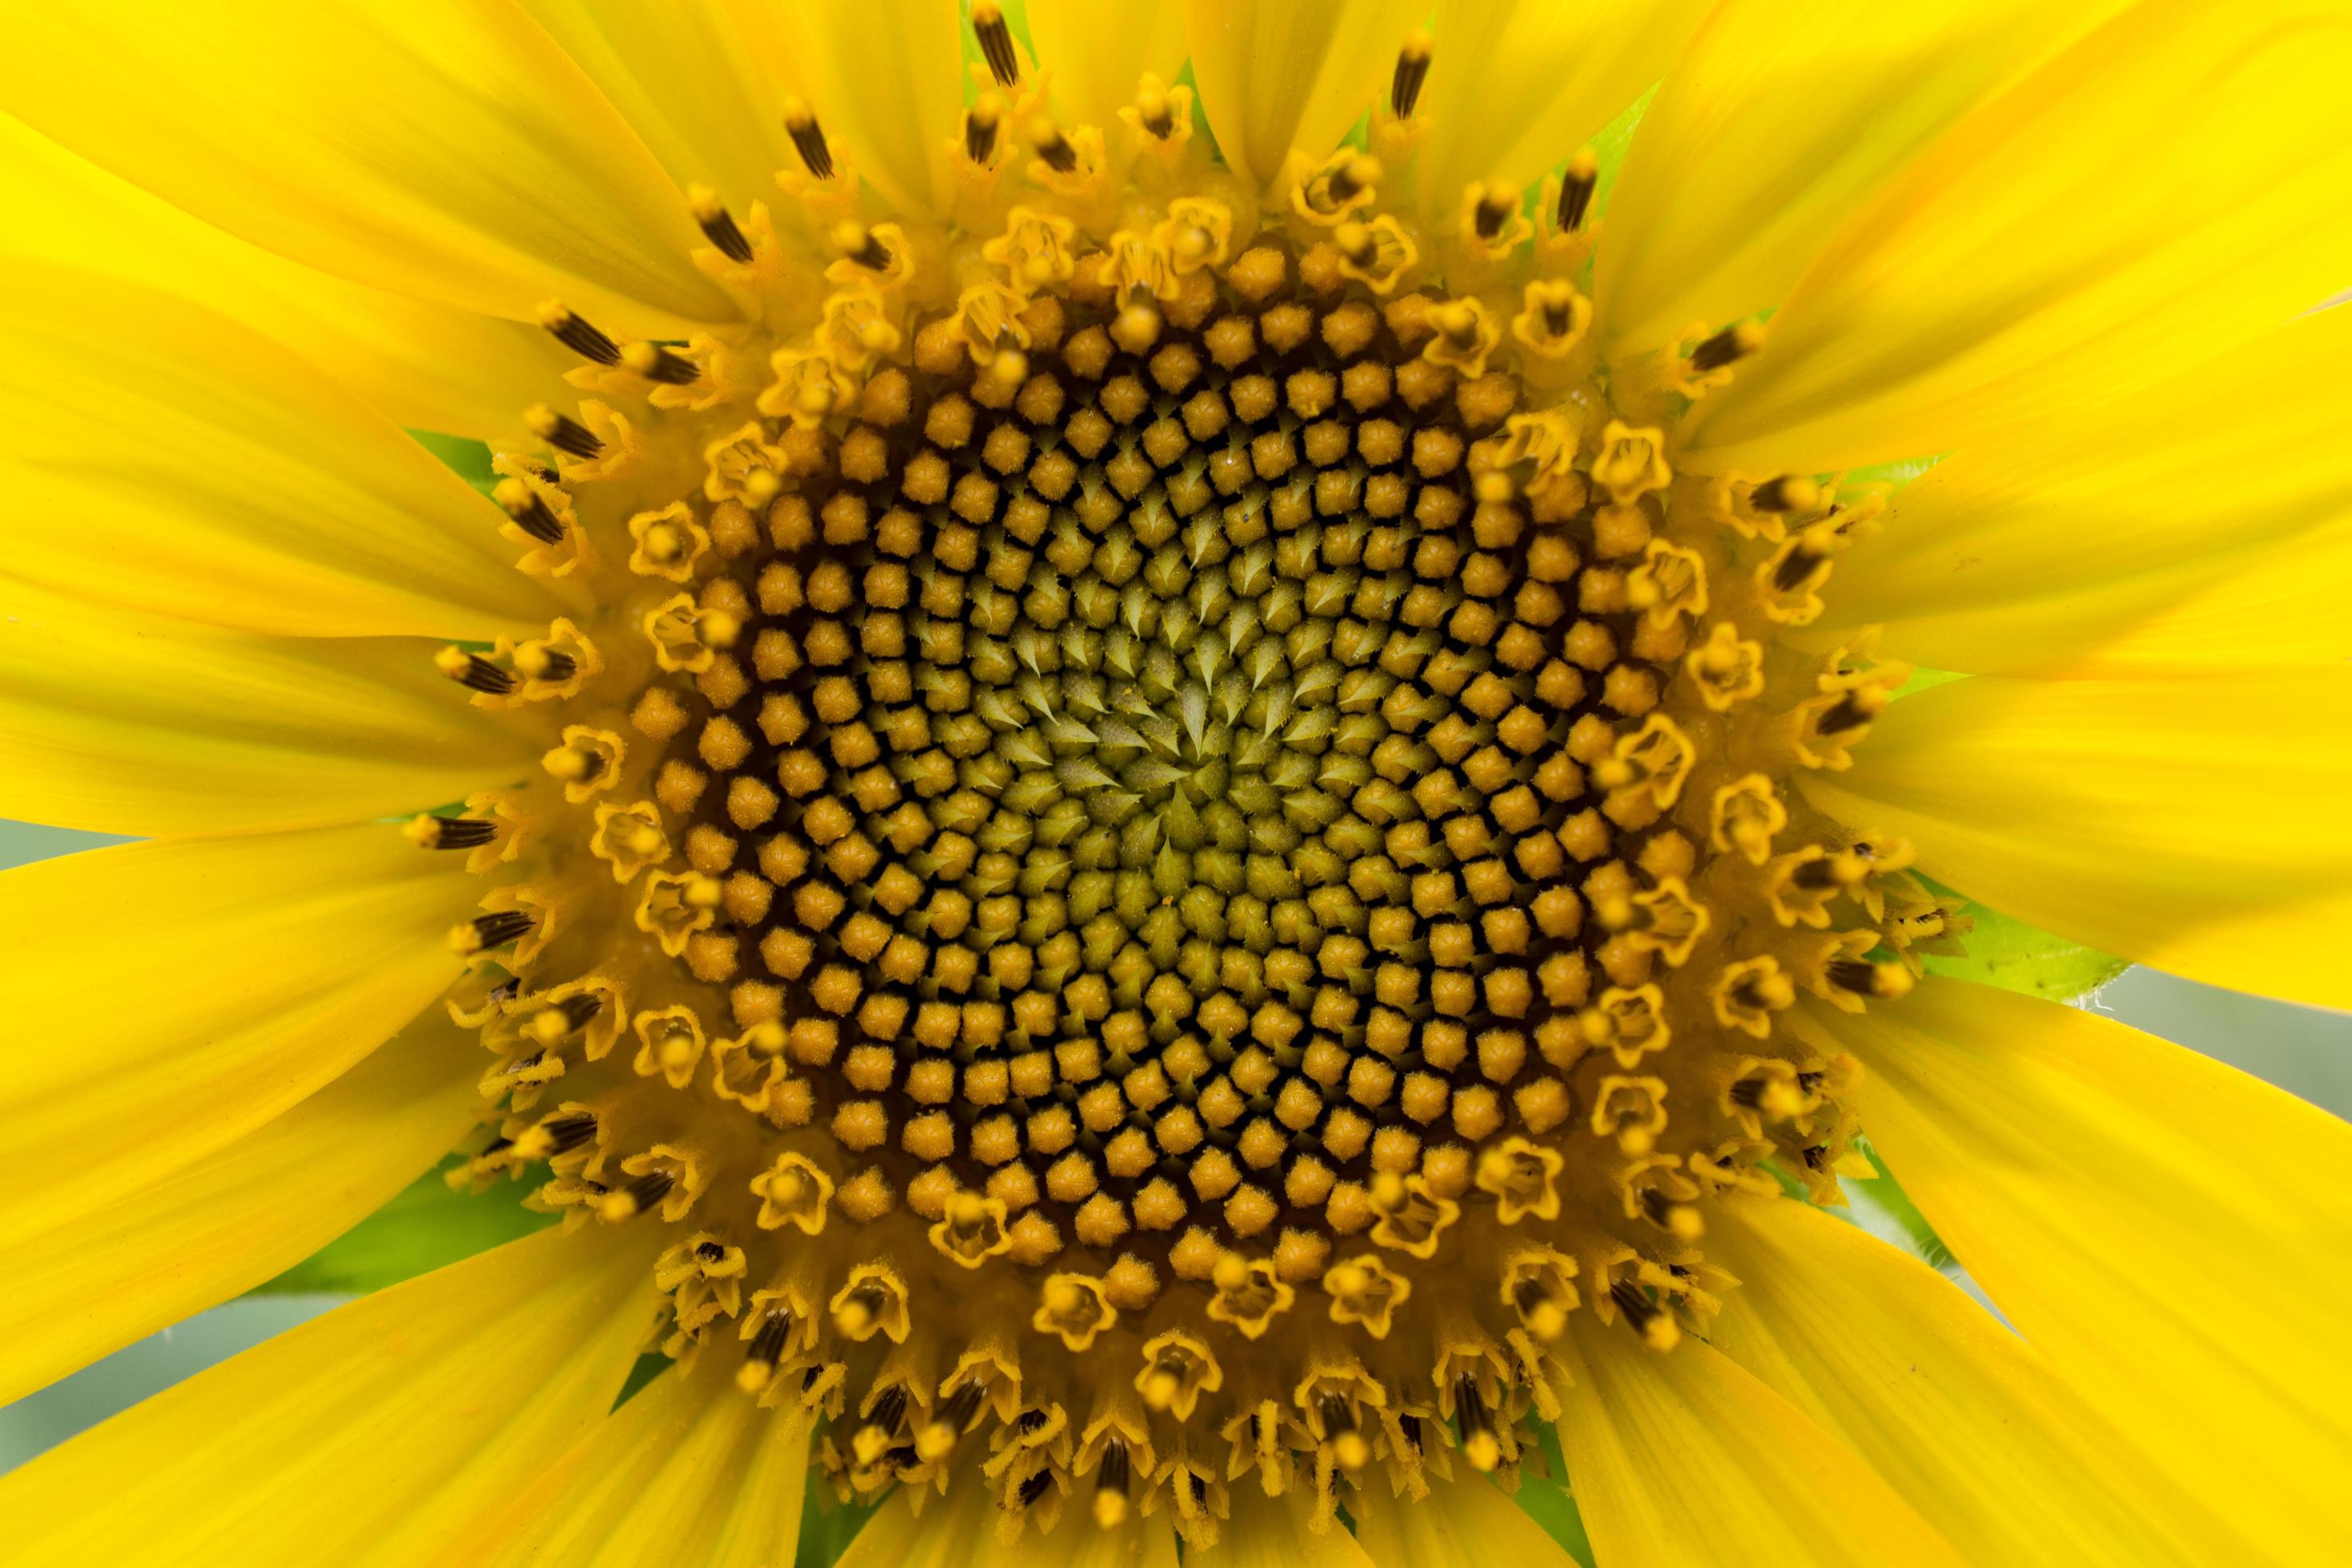 close-up-of-the-sunflower-sunflower-florets-are-arranged-in-a-natural-spiral-having-a-fibonacci-sequence-free-photo.jpg